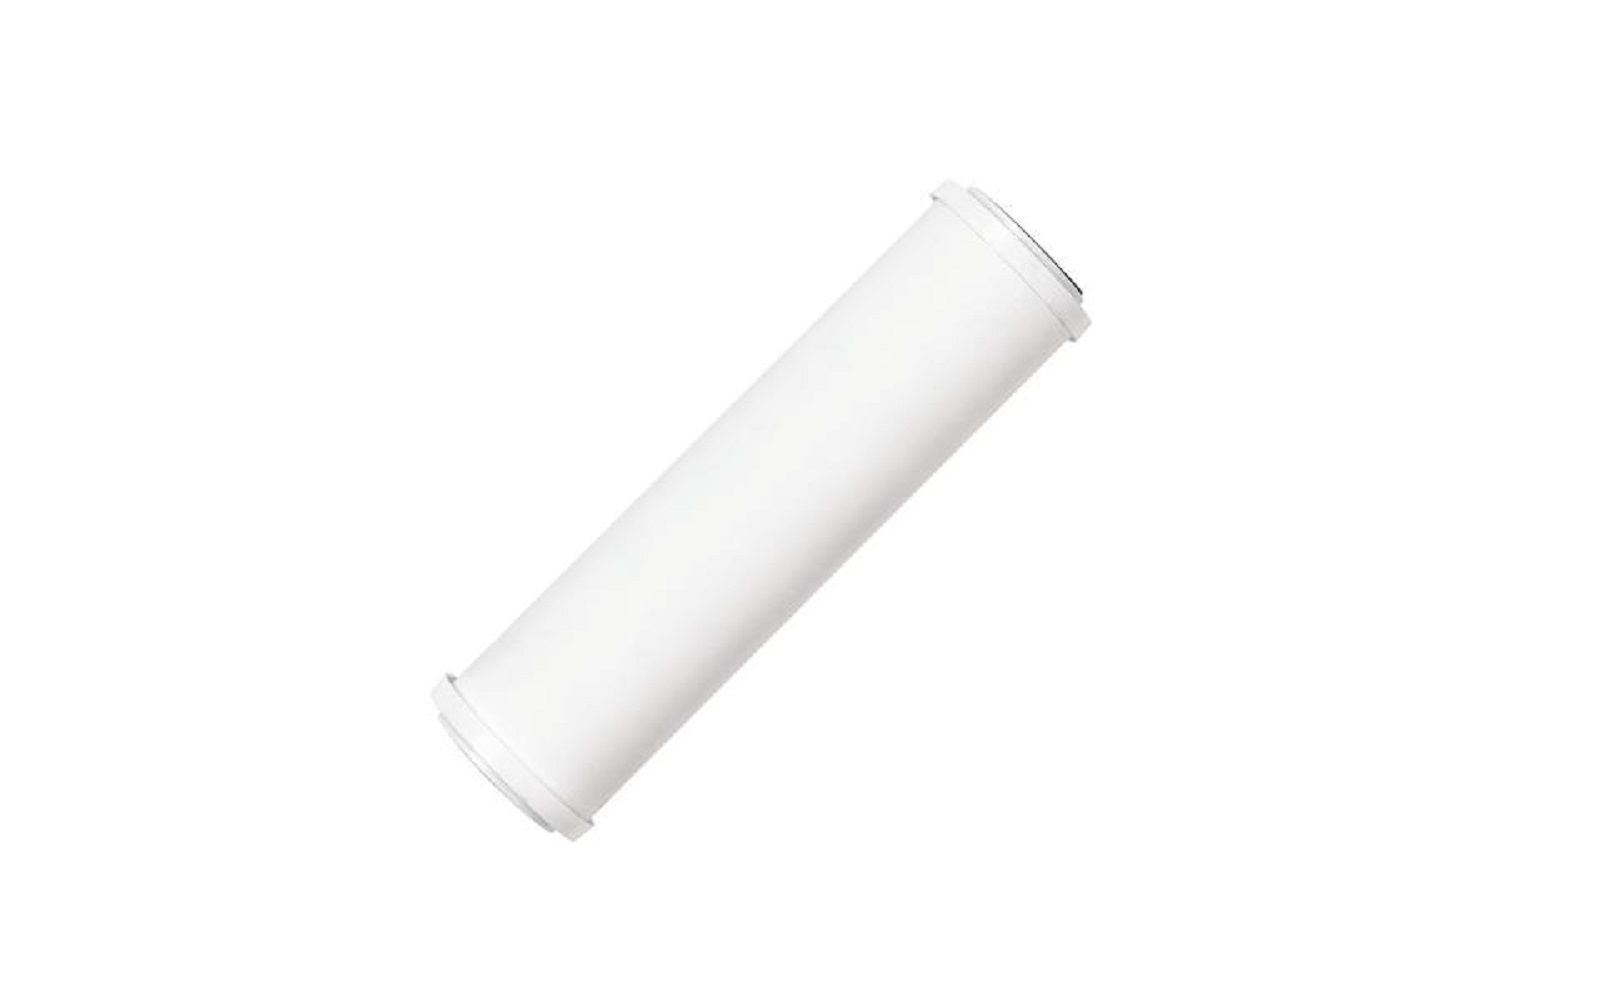 Vistaclear™ hp replacement sediment filter